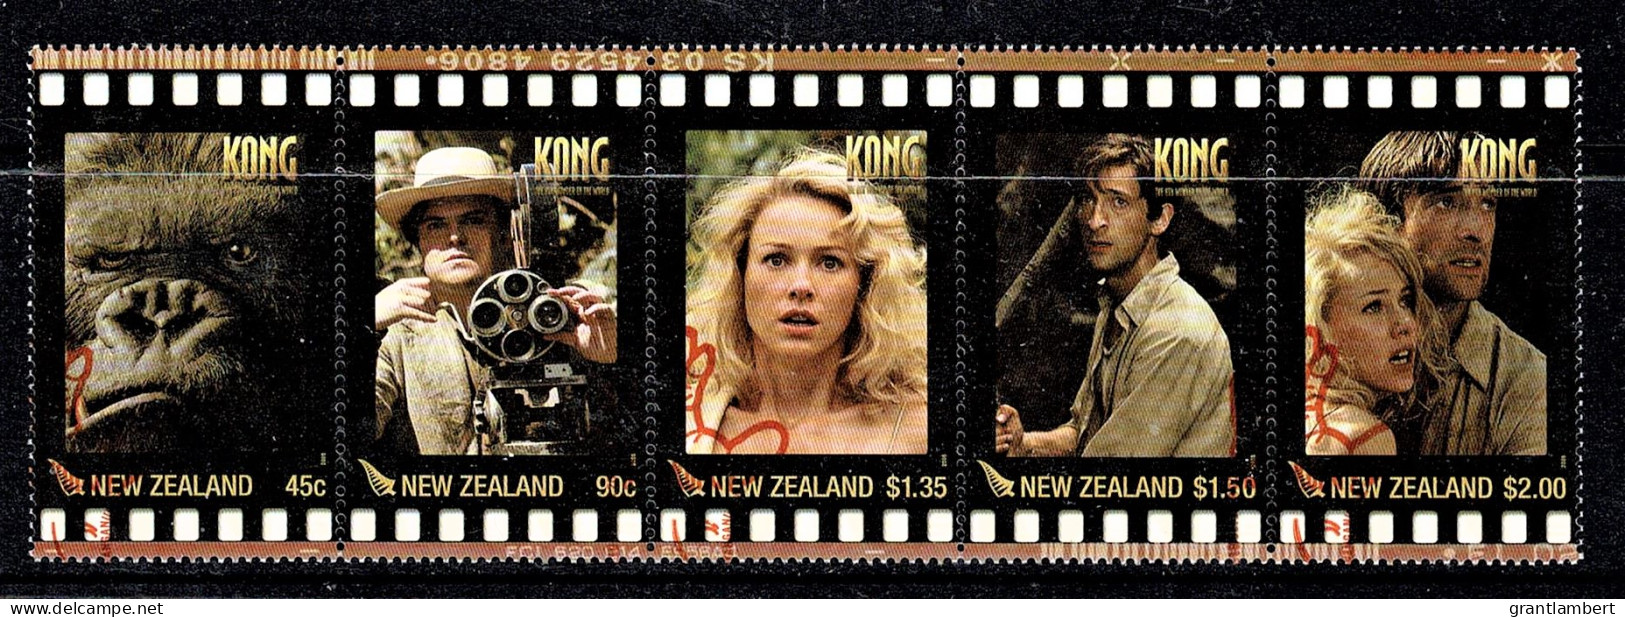 New Zealand 2005 King Kong Set As Strip Of 5 Used - Used Stamps